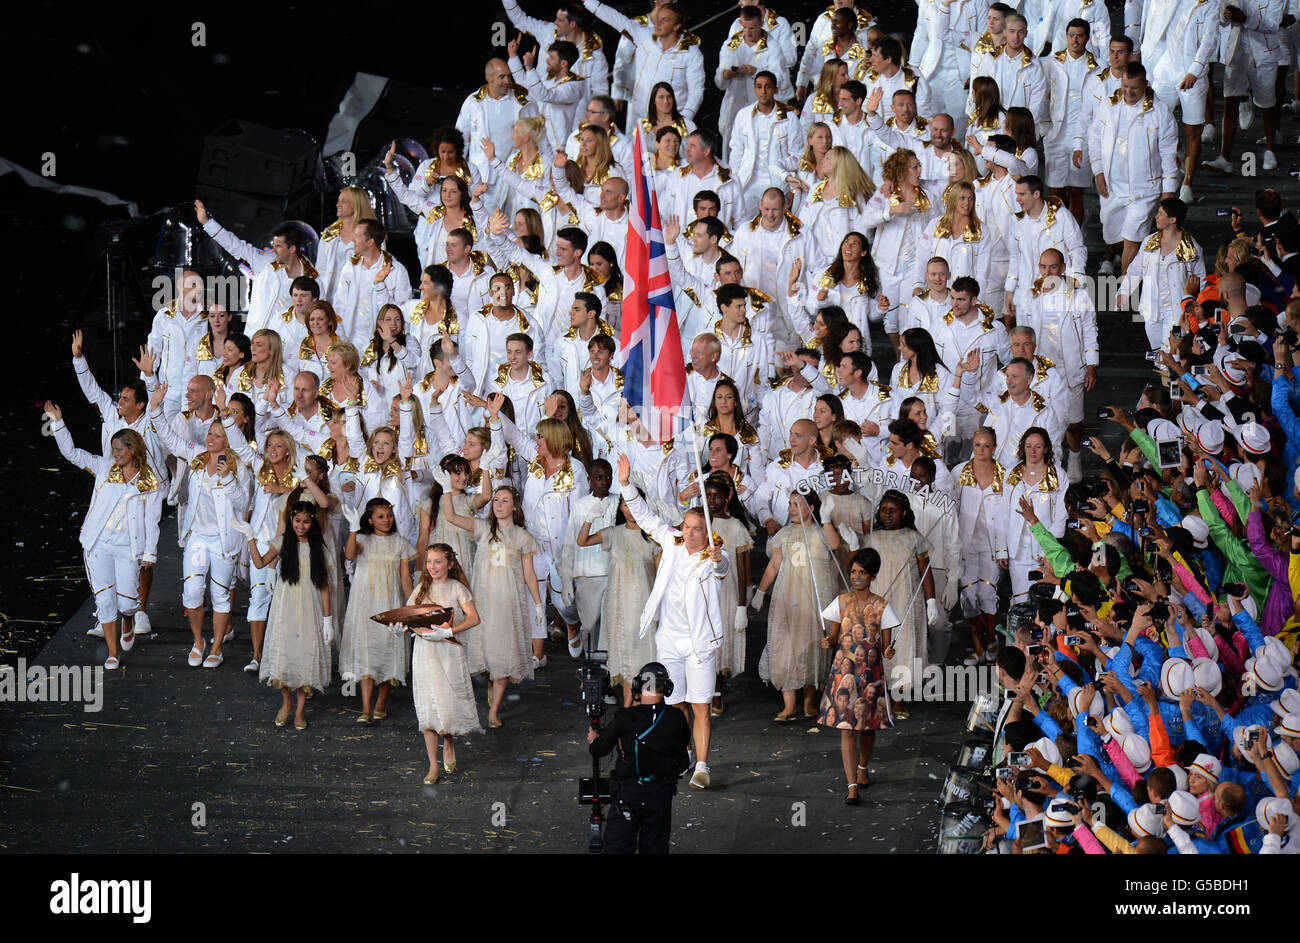 Great Britain's Sir Chris Hoy carrying the Britsh flag leads the team during the London Olympic Games 2012 Opening Ceremony at the Olympic Stadium, London. Stock Photo